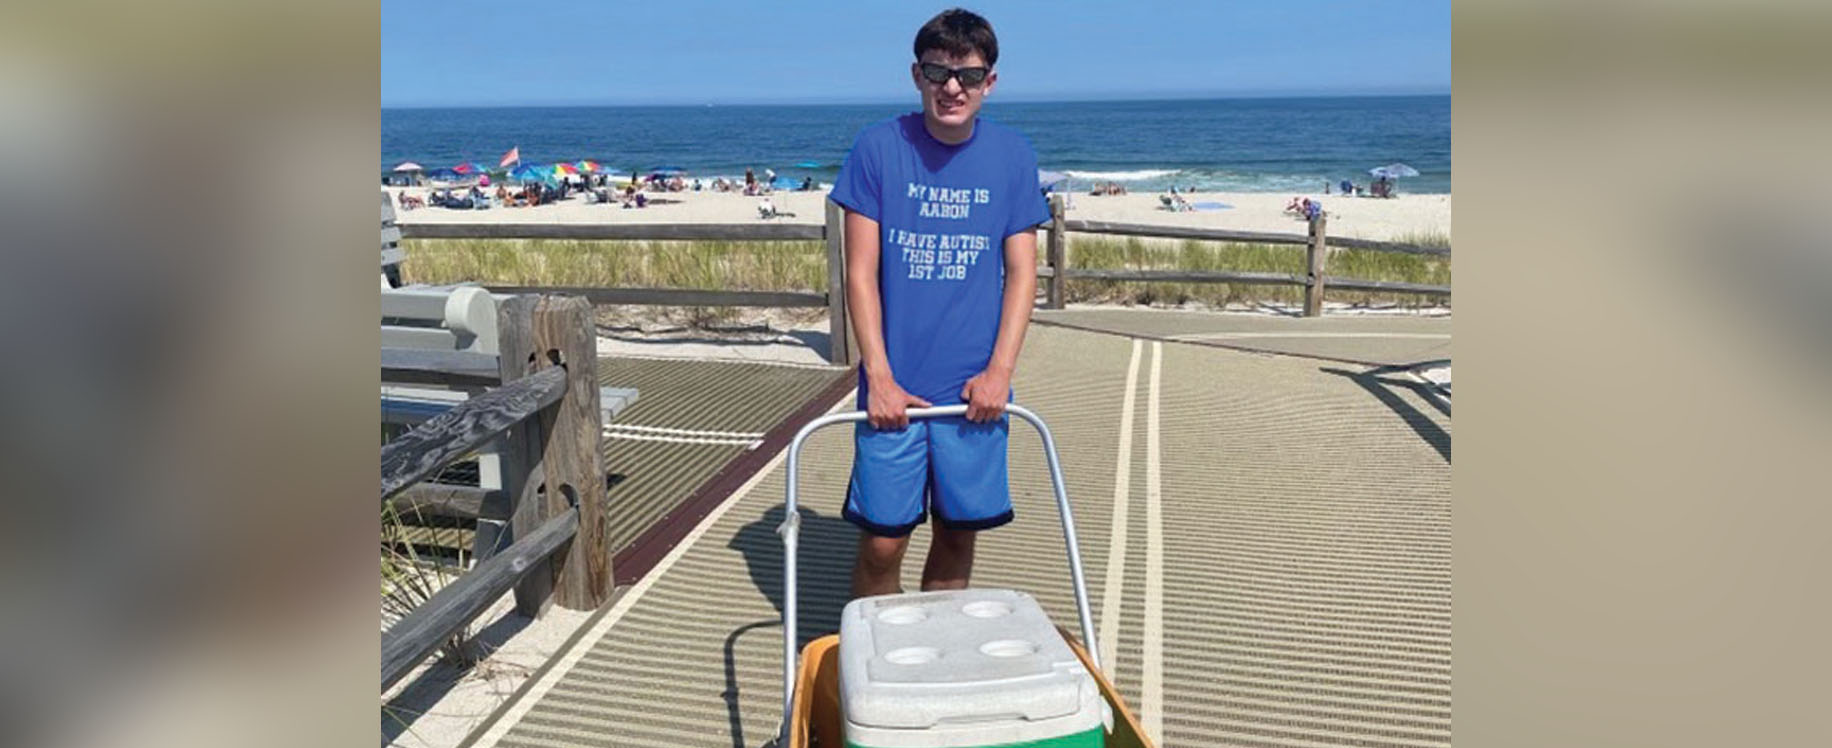 Aaron selloing ice cream on the beach while on vacation